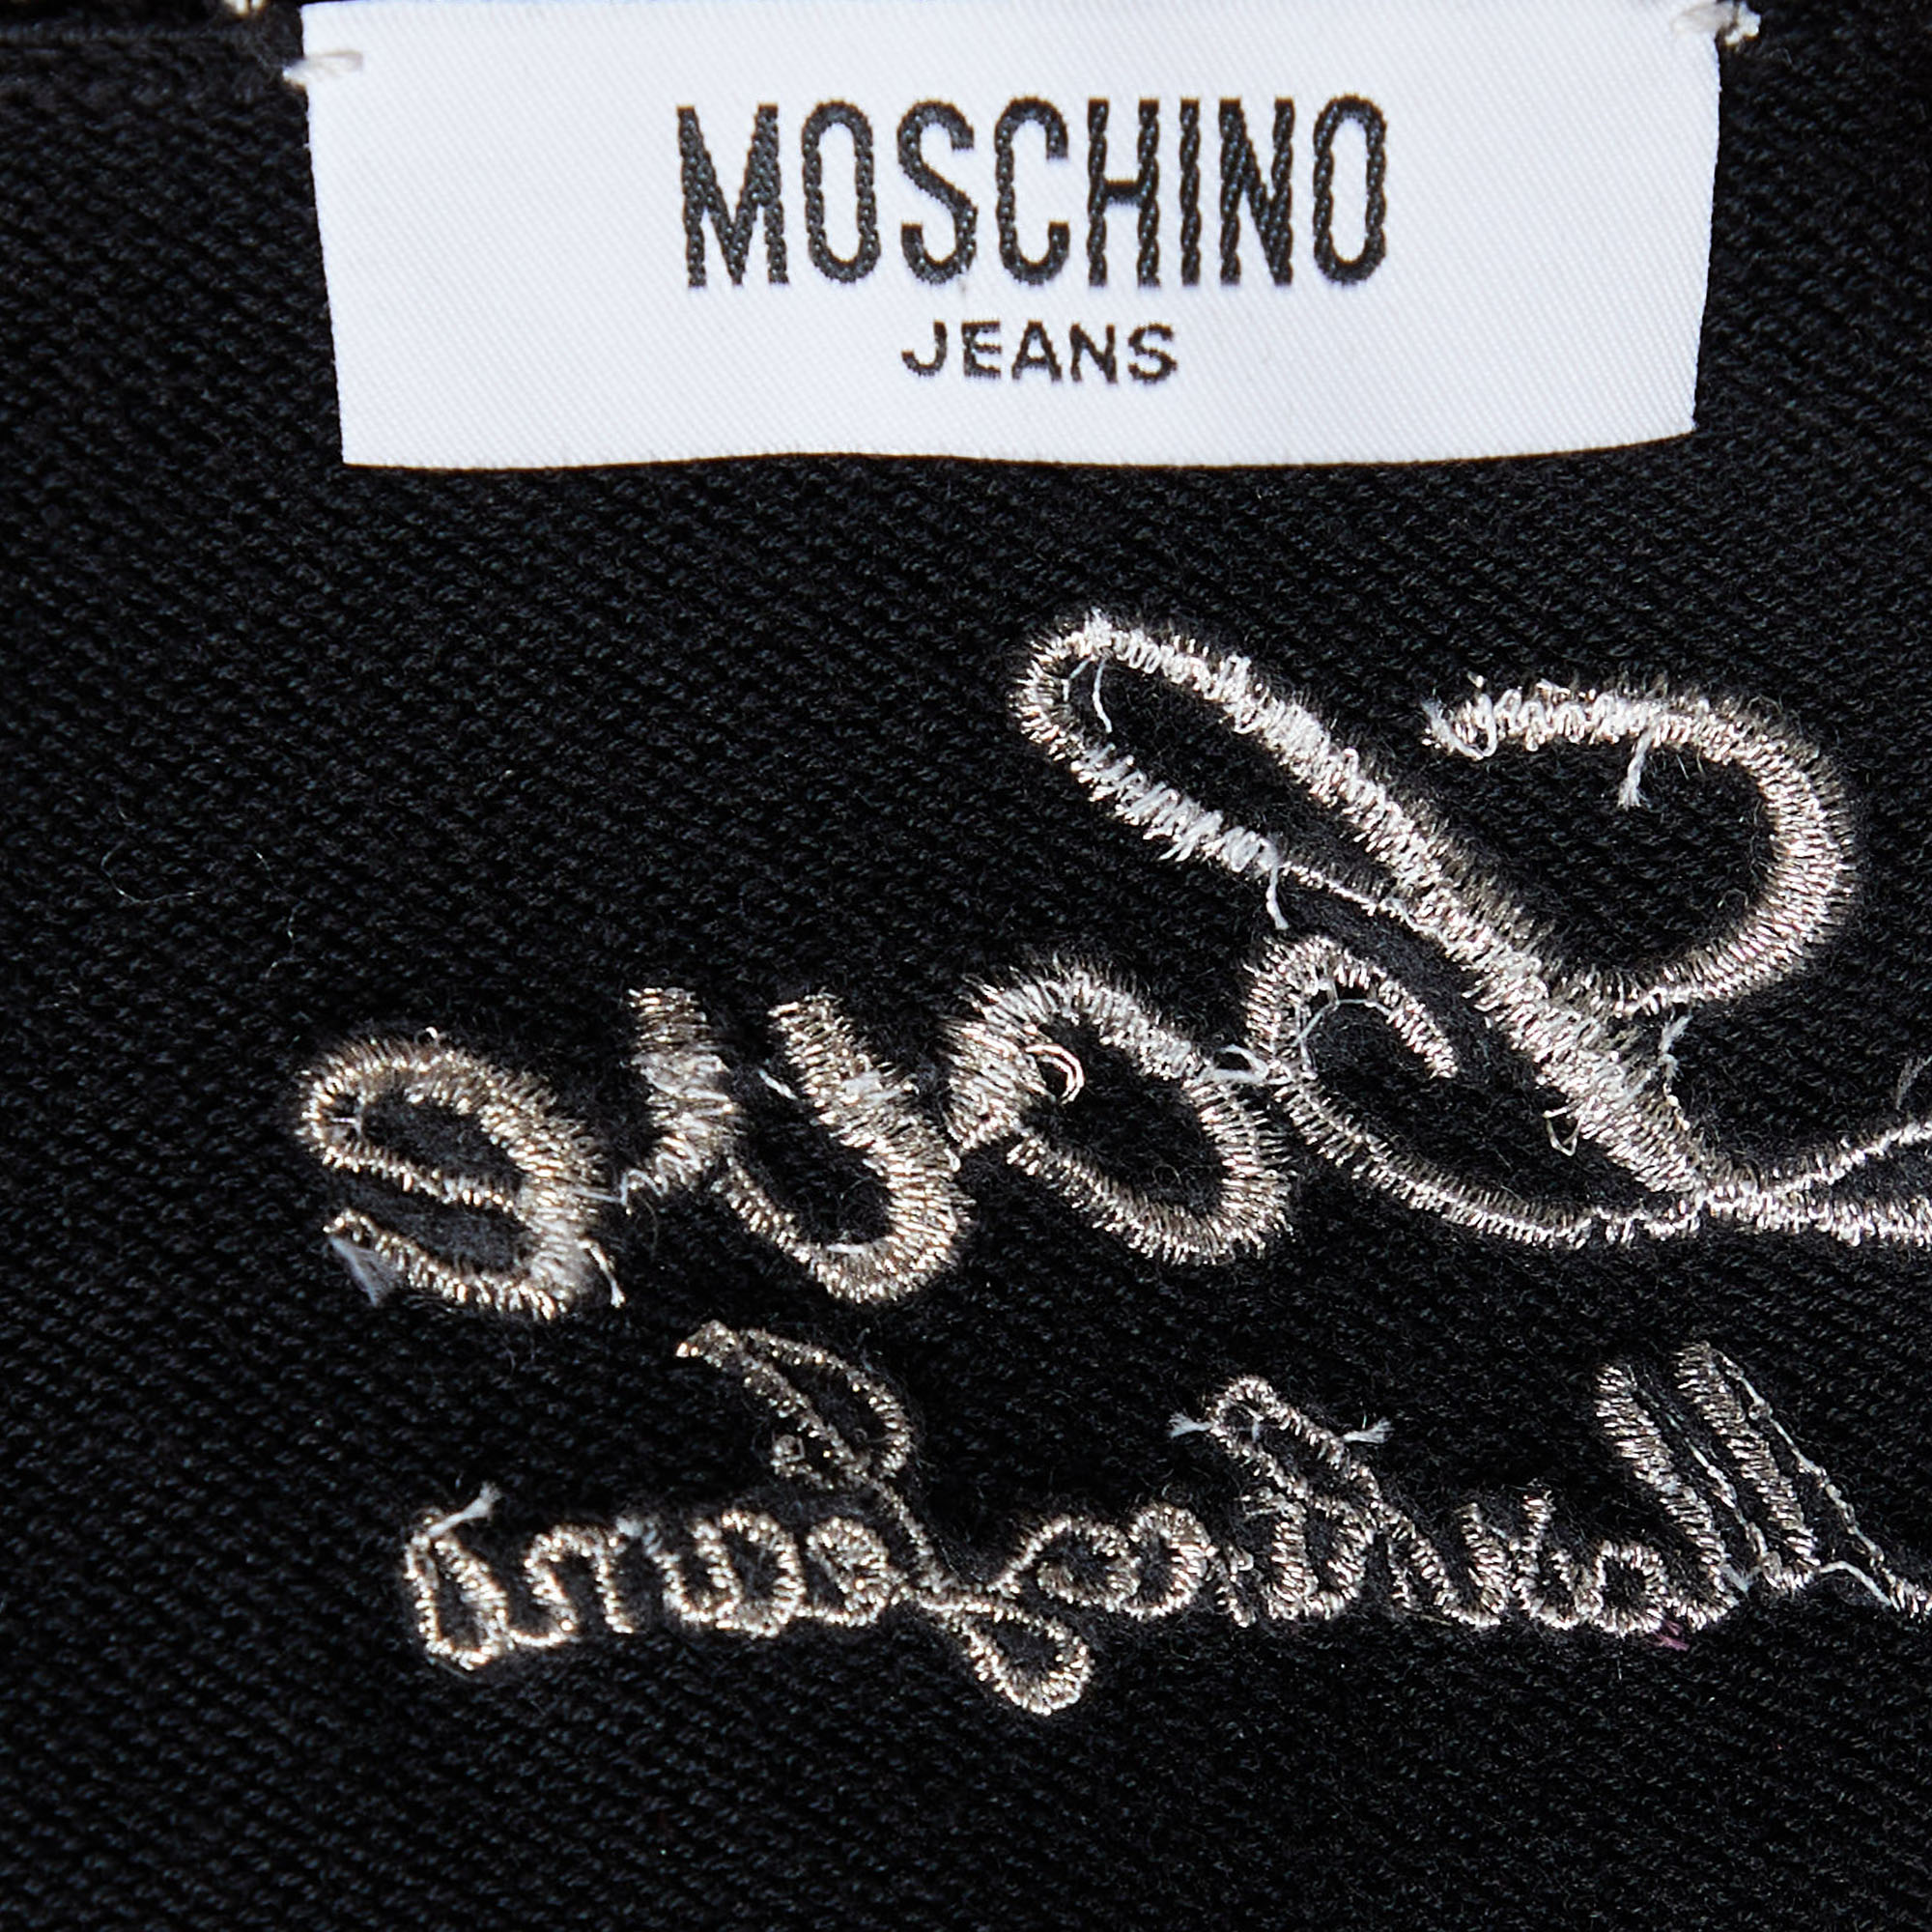 Moschino Jeans Black Button Embellished Cotton Knit Shrug M